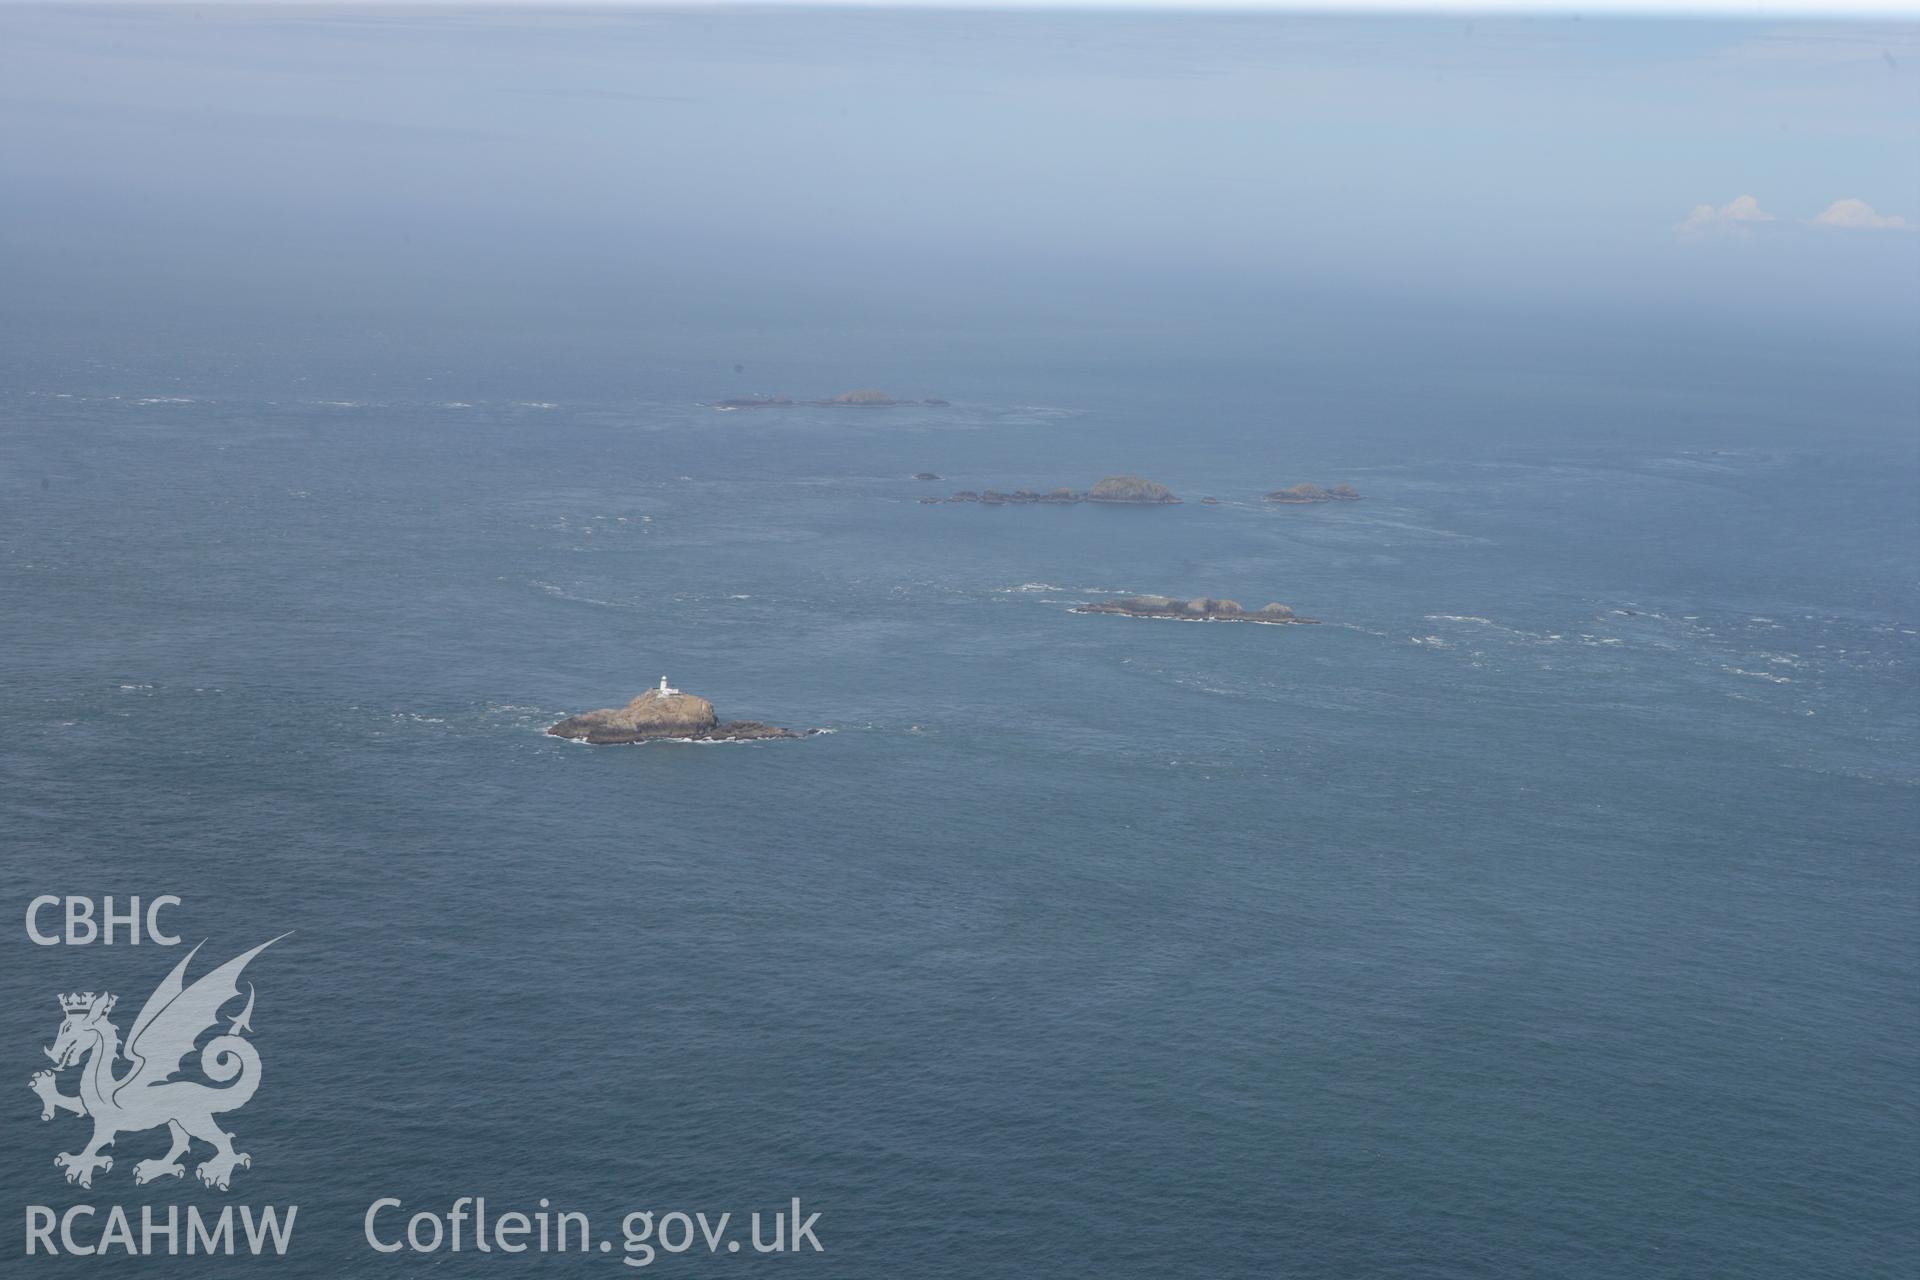 RCAHMW colour oblique photograph of South Bishop, west of Ramsey Island, distant view. Taken by Toby Driver on 09/09/2010.